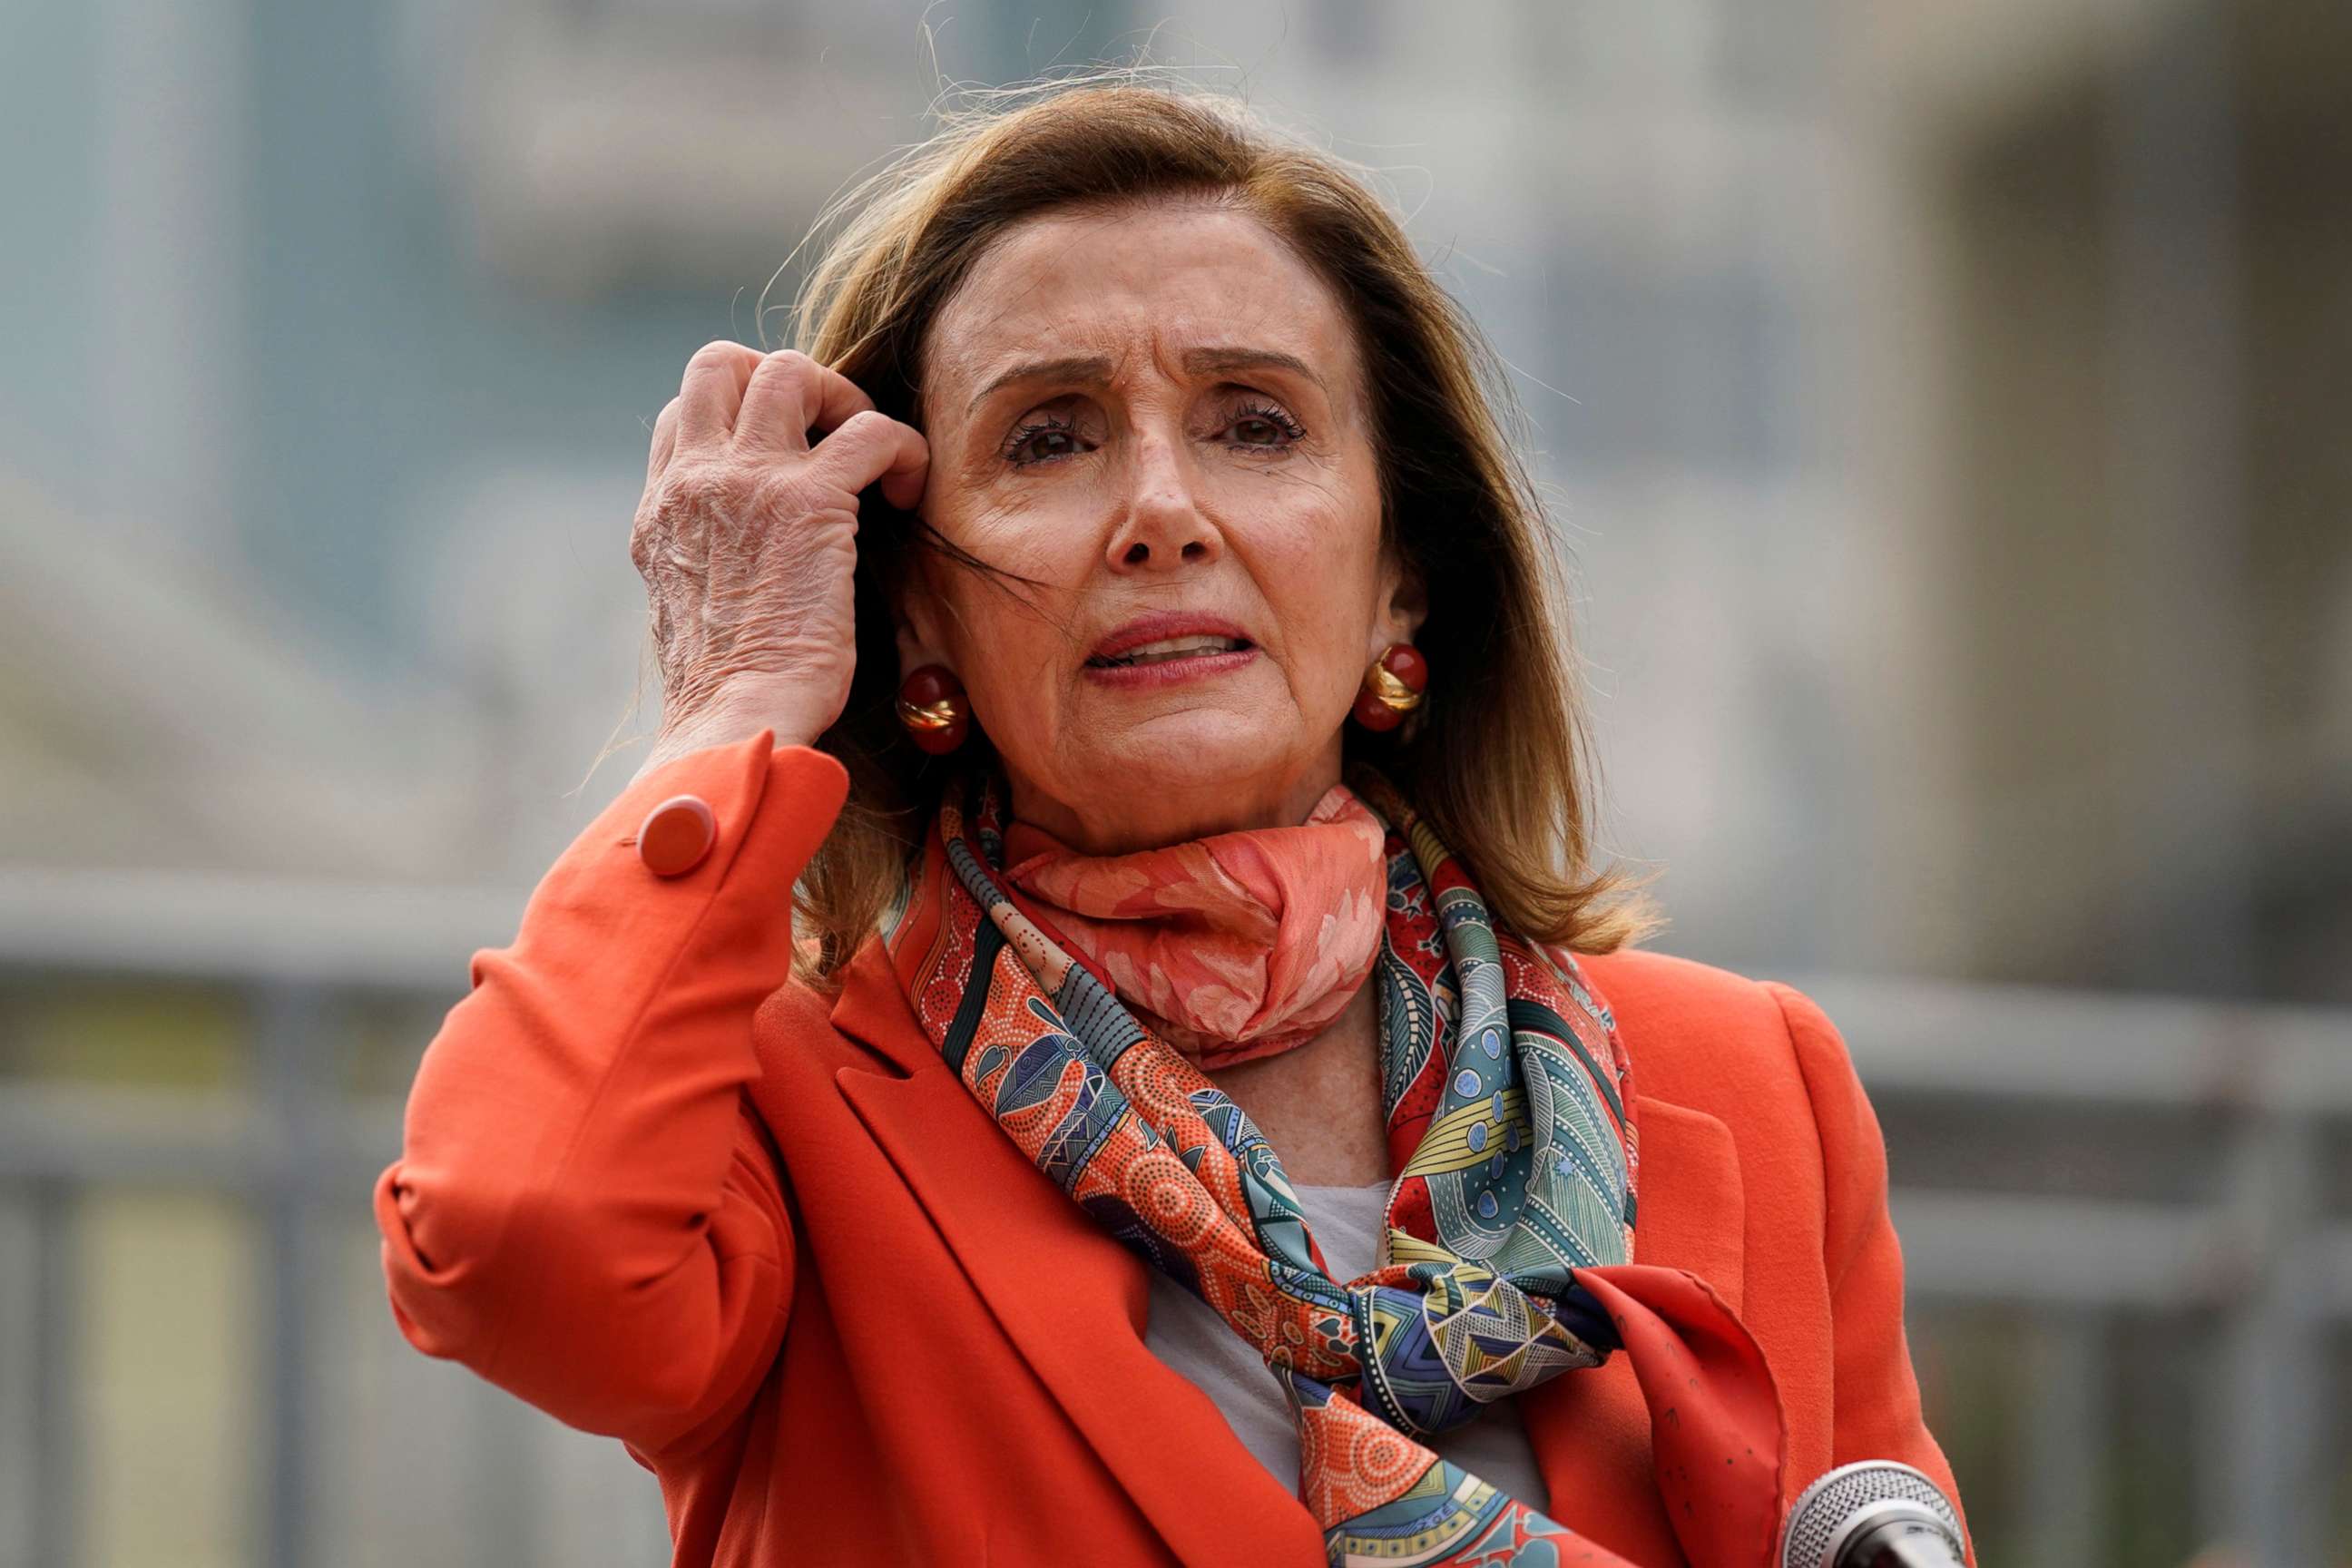 PHOTO: House Speaker Nancy Pelosi pulls back her hair while speaking about her visit to a hair salon during a news conference at the Mission Education Center Elementary School Wednesday, Sept. 2, 2020, in San Francisco.